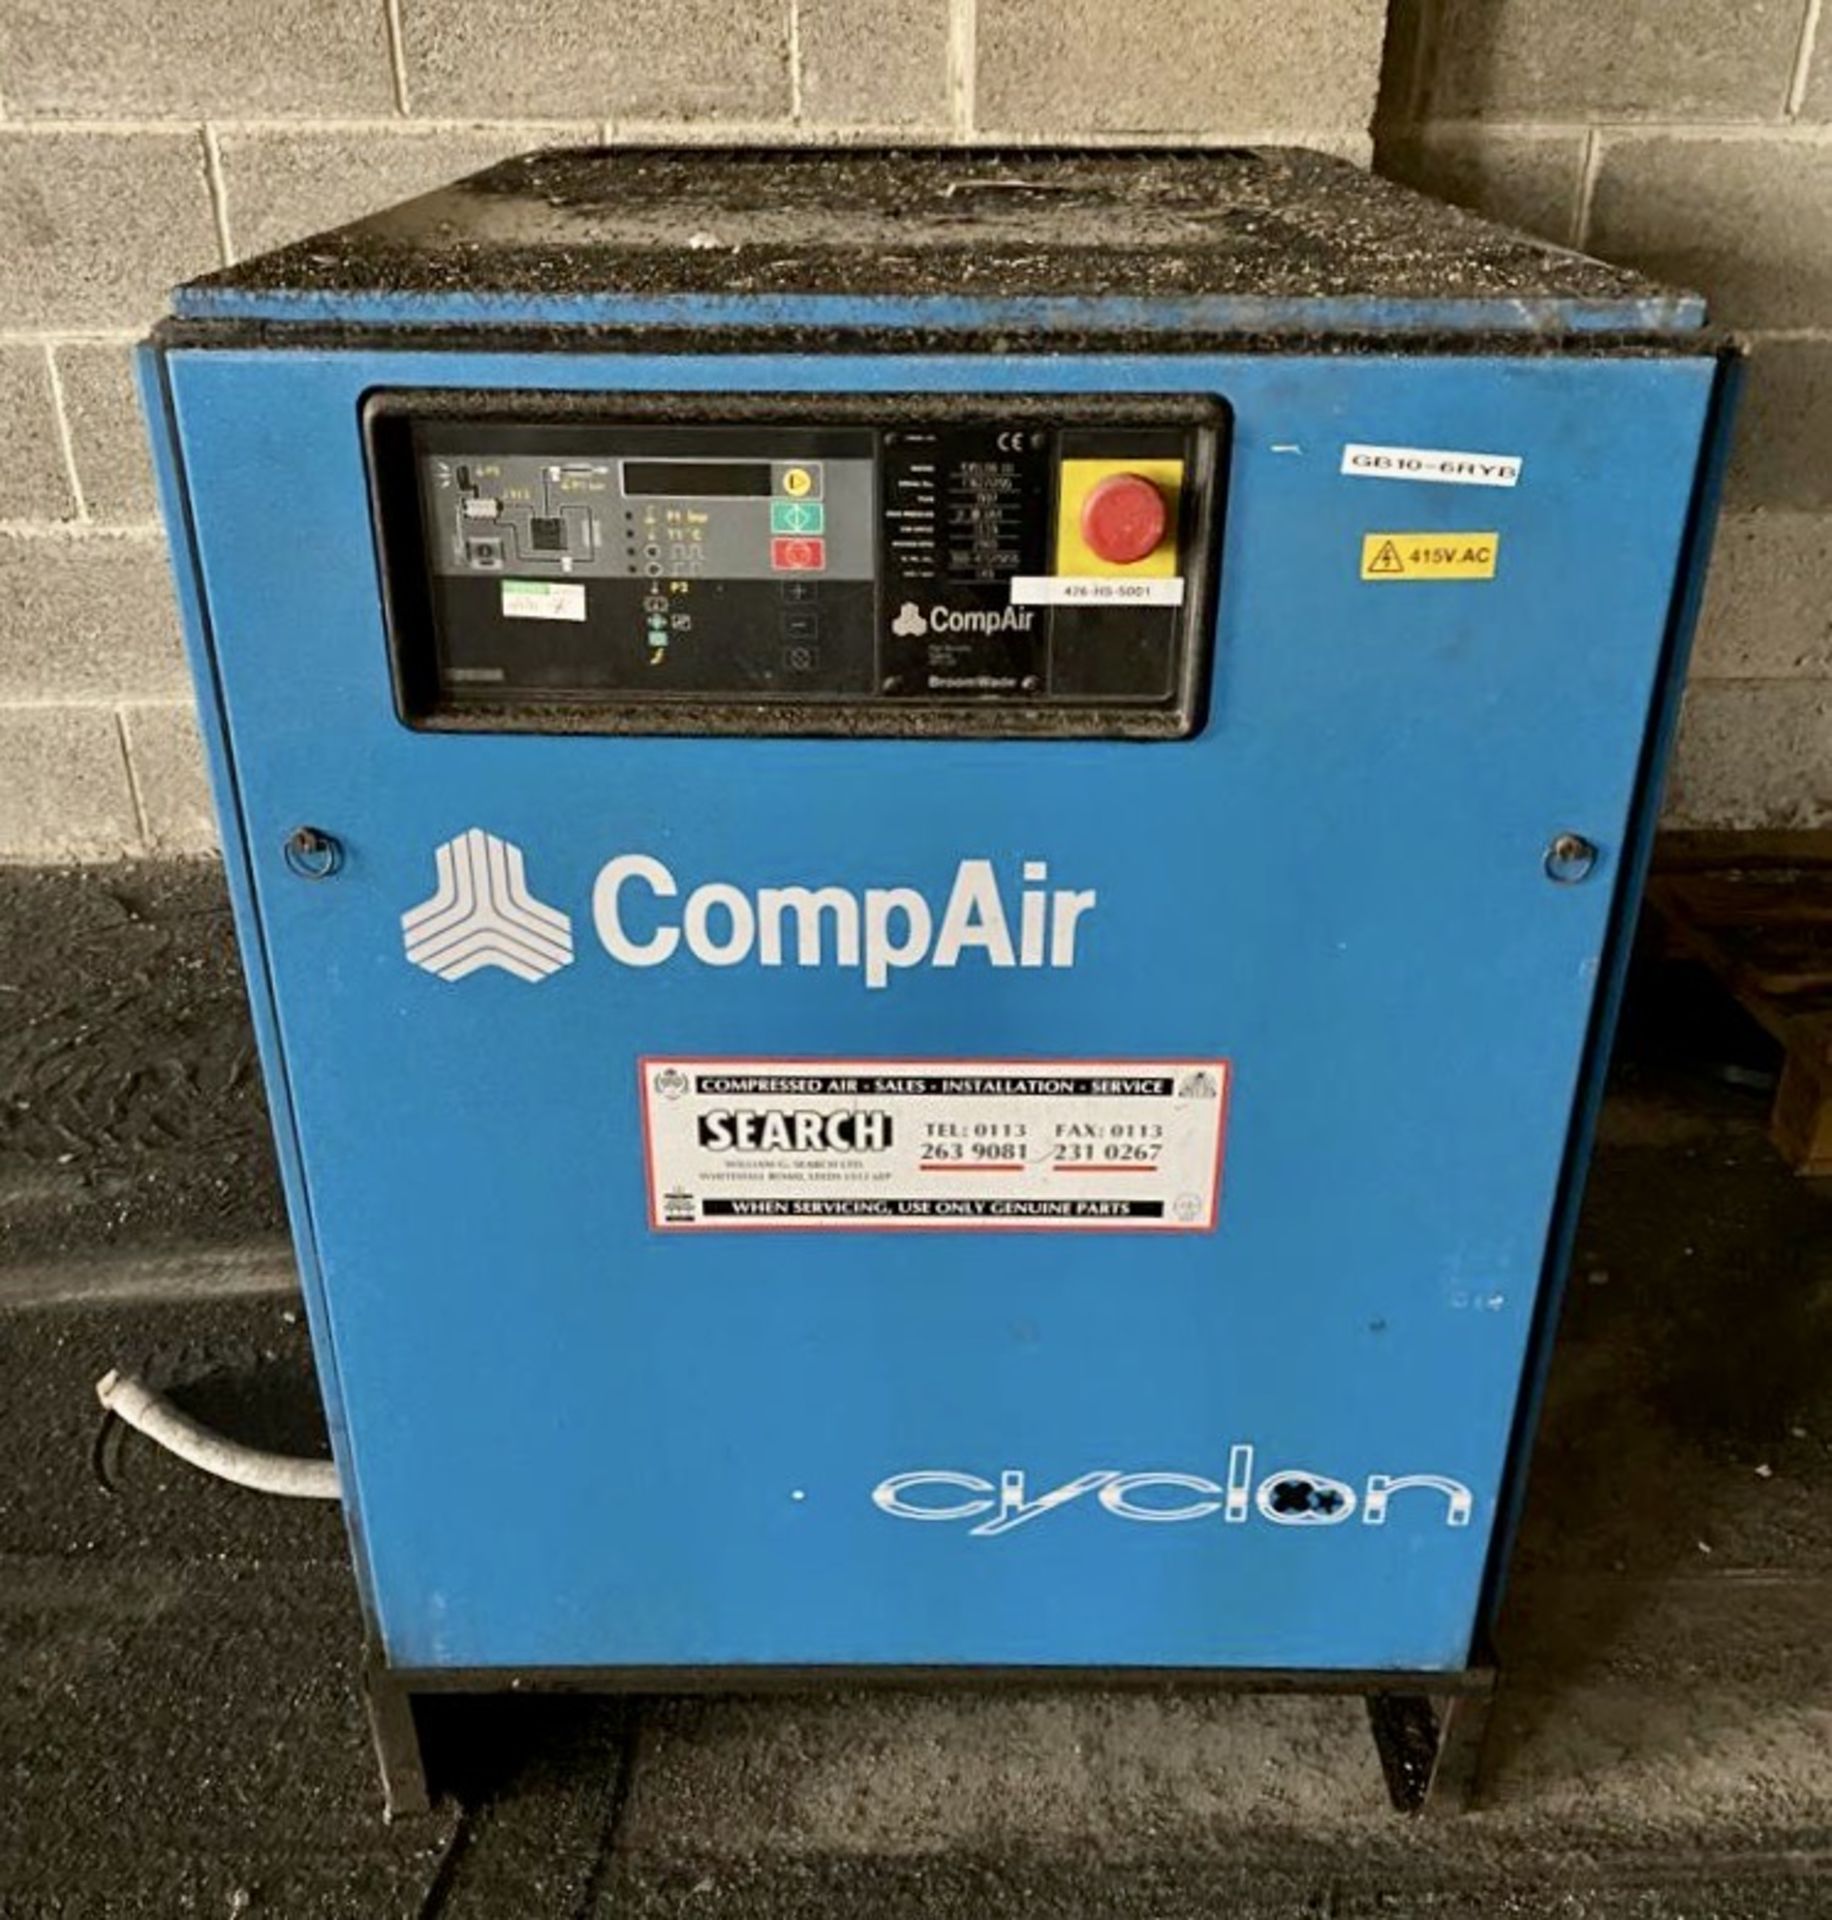 Compair Broomwade Cyclon III Packaged Air Compressor, 10bar, 149m³/min, serial number F162/1200, - Image 2 of 6